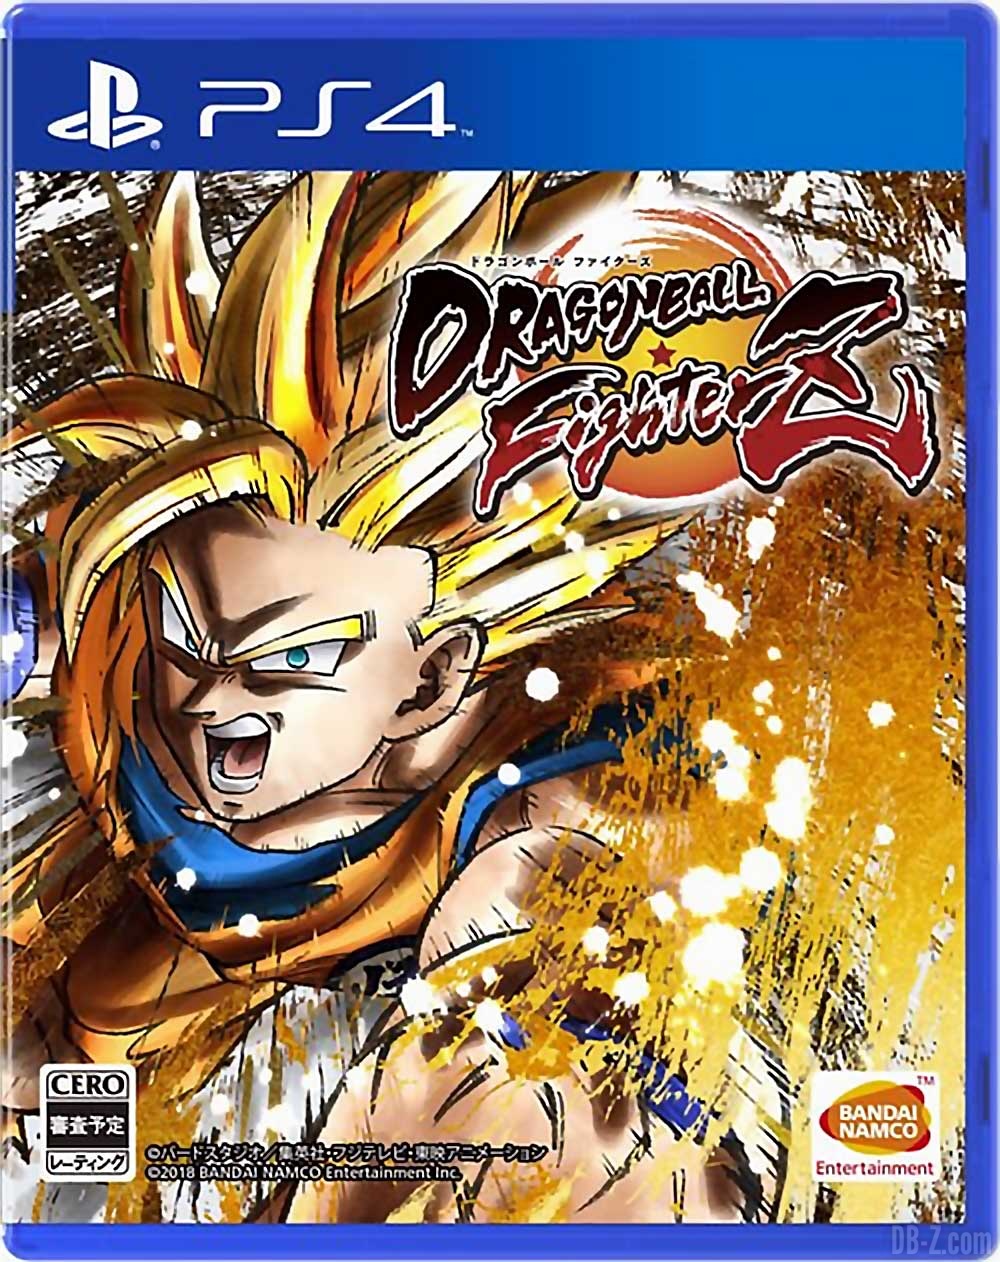 https://www.db-z.com/wp-content/uploads/2017/10/Cover-Dragon-Ball-FighterZ-low-q.jpg